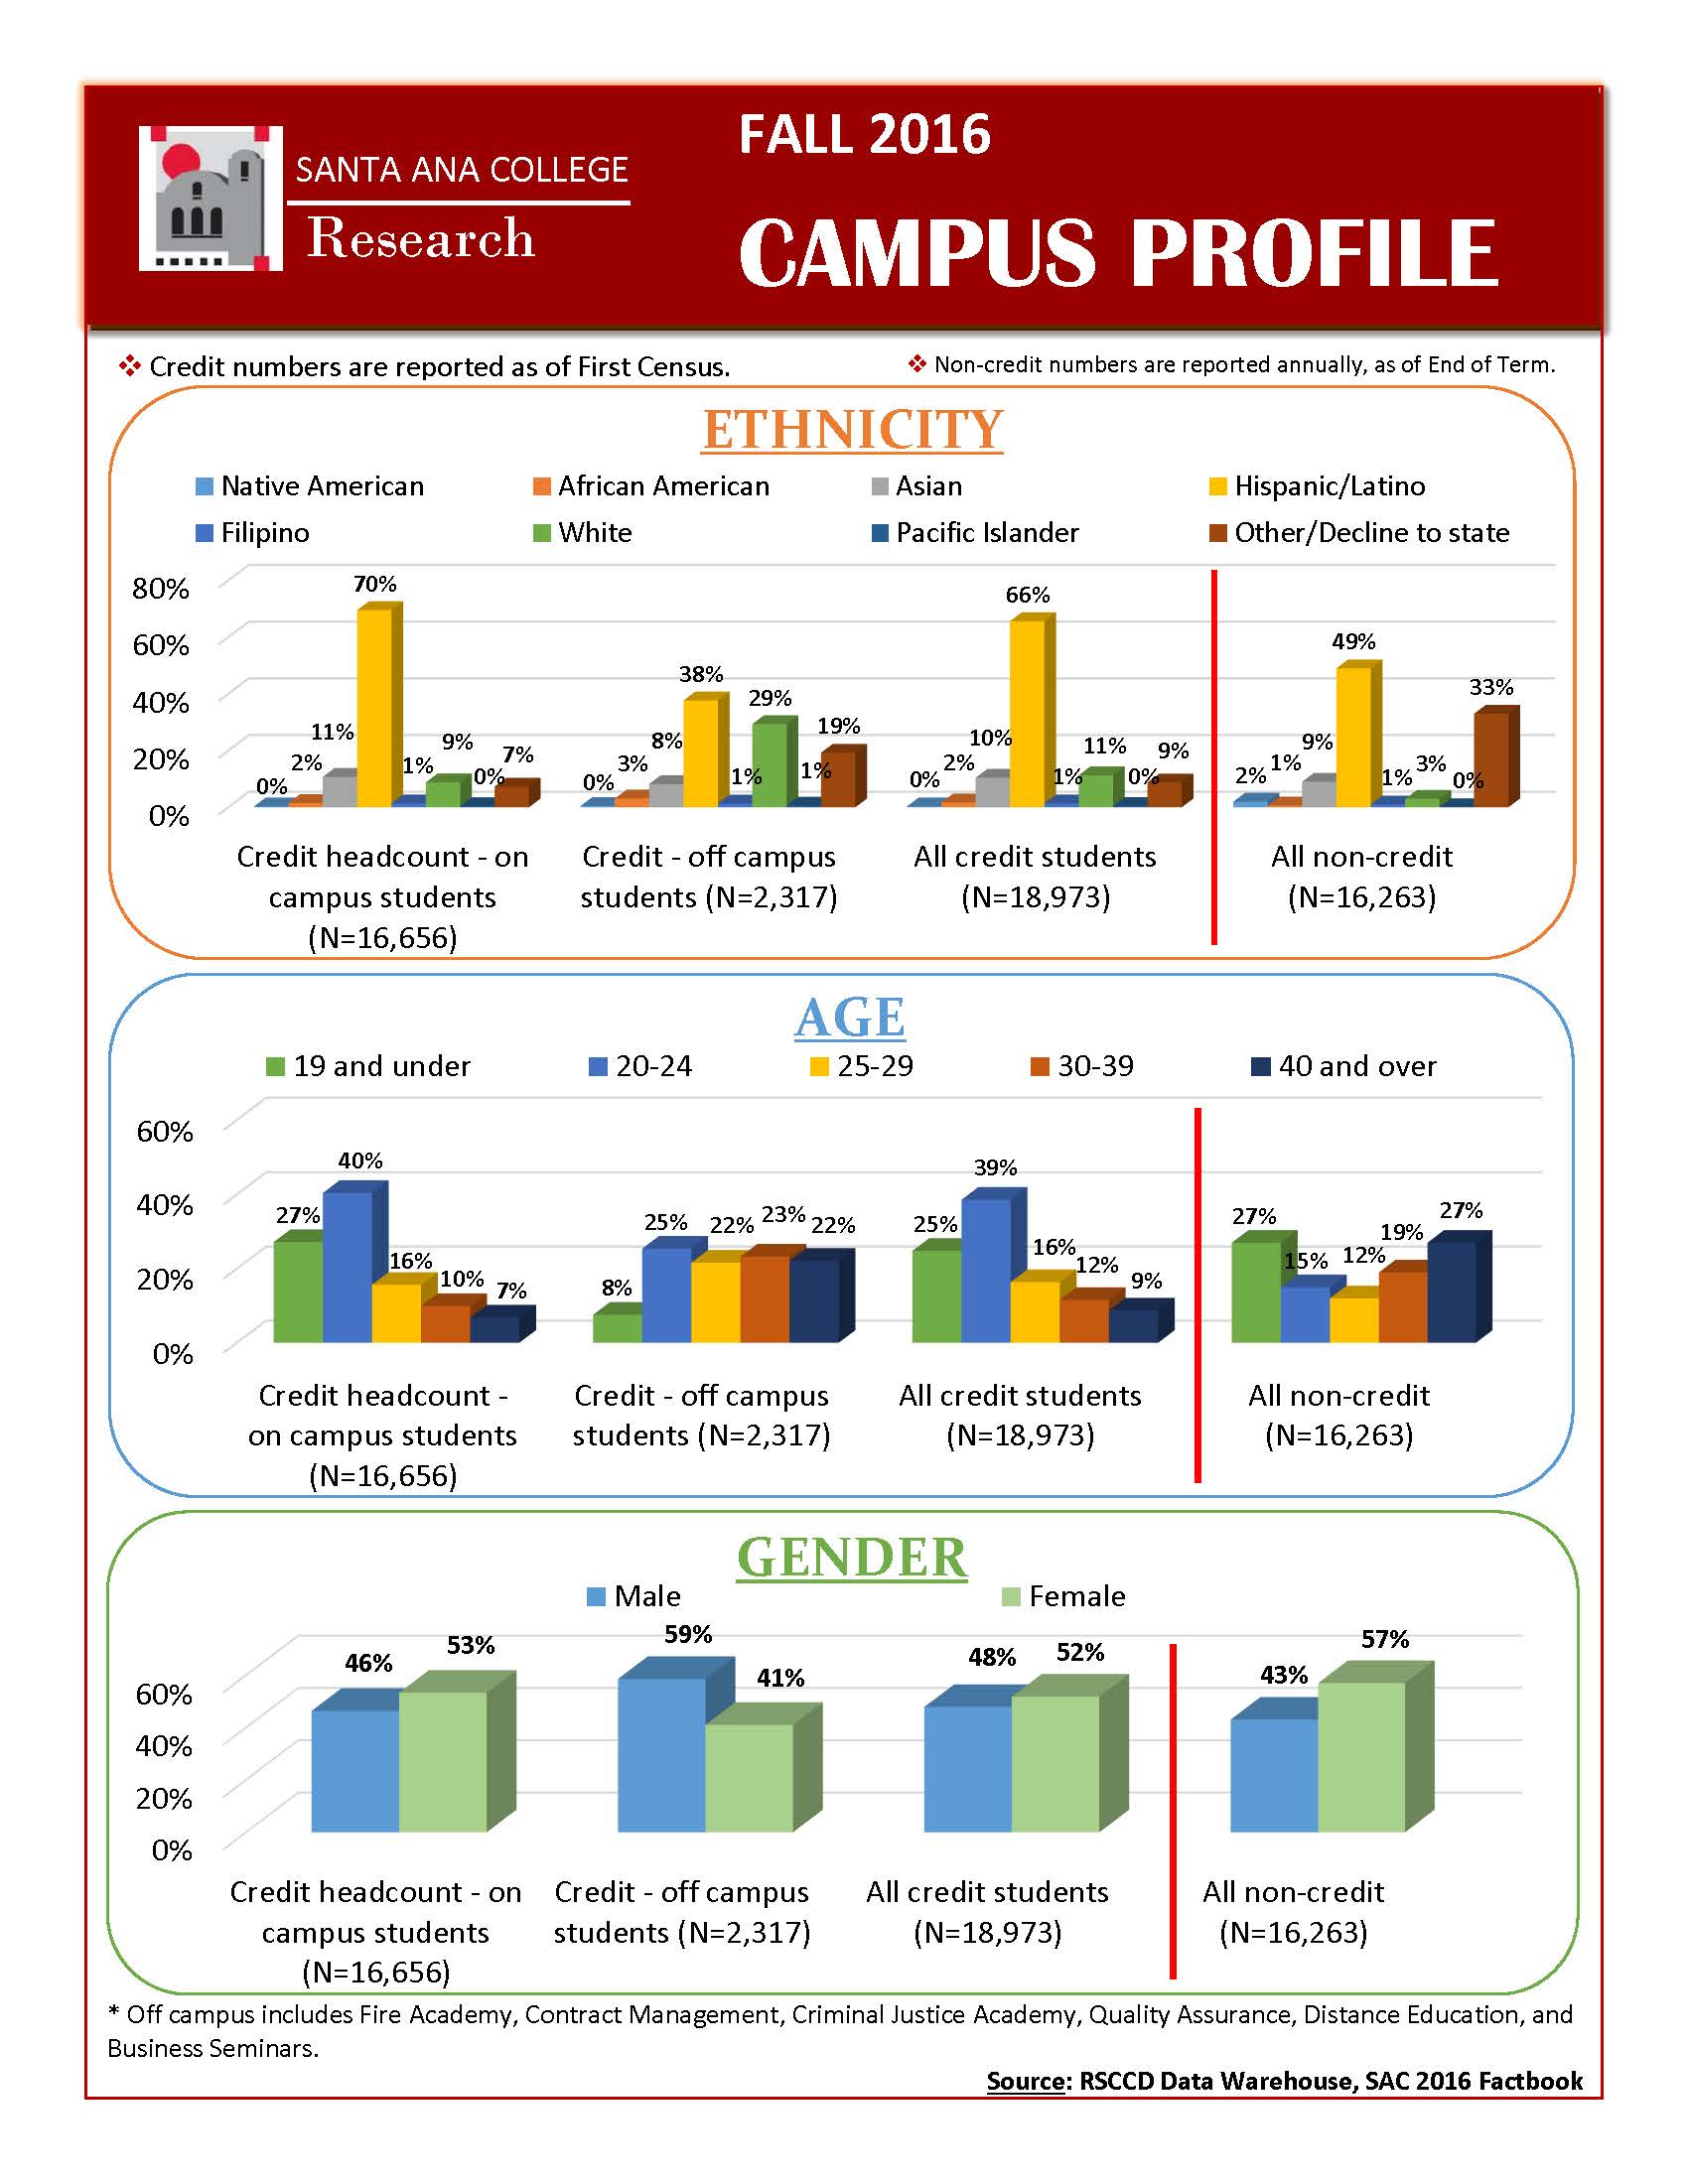 Campus Profile_2016 edited  non credit is annual count_Page_1.jpg